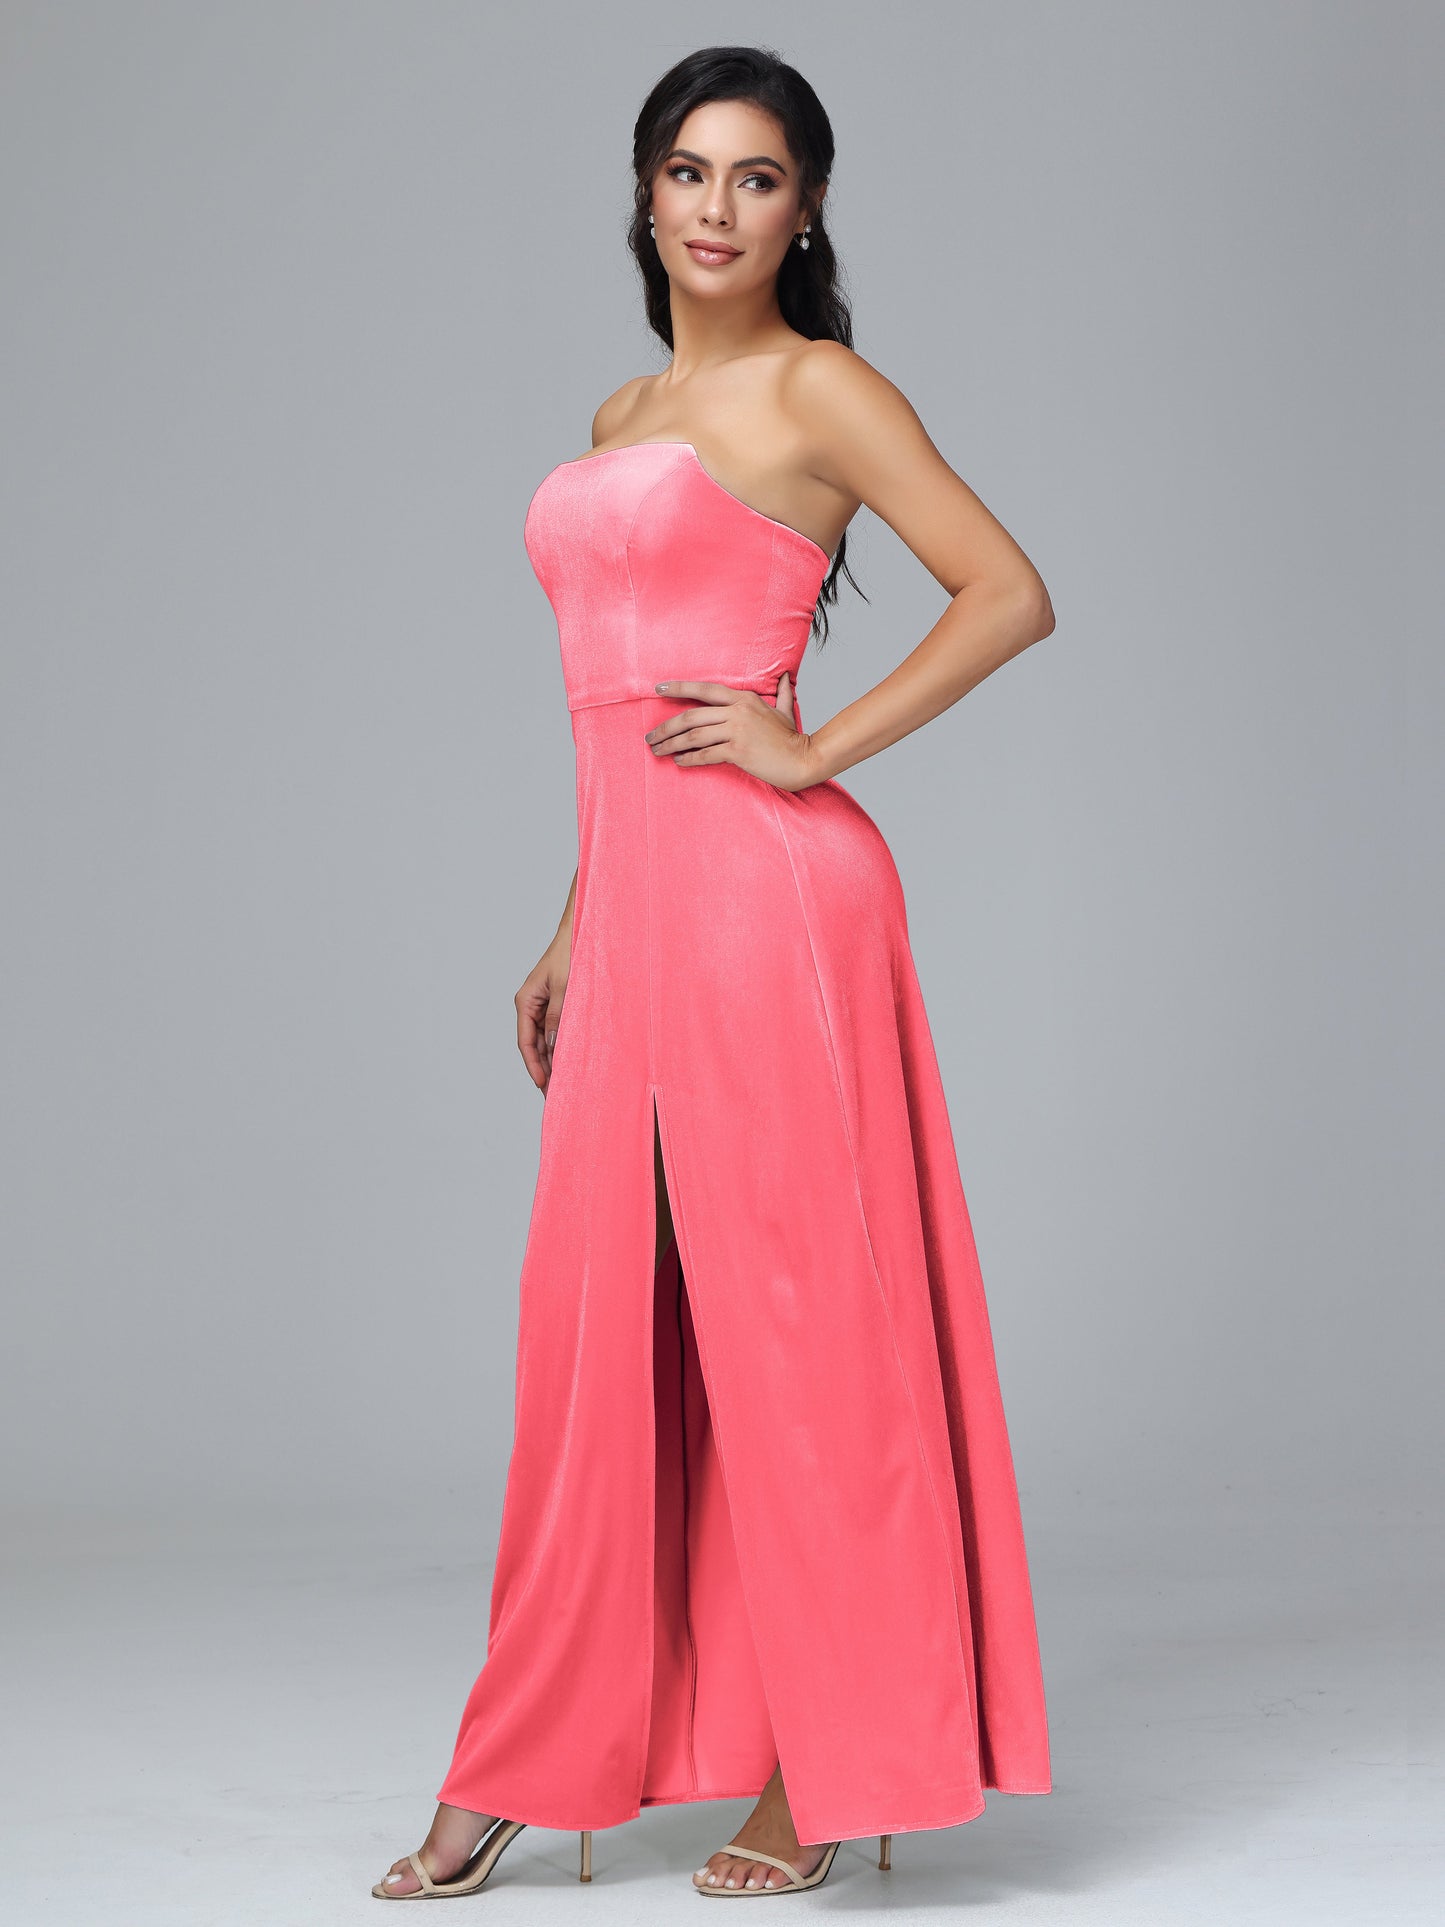 Strapless Backless Plus Size Bridesmaid Dresses